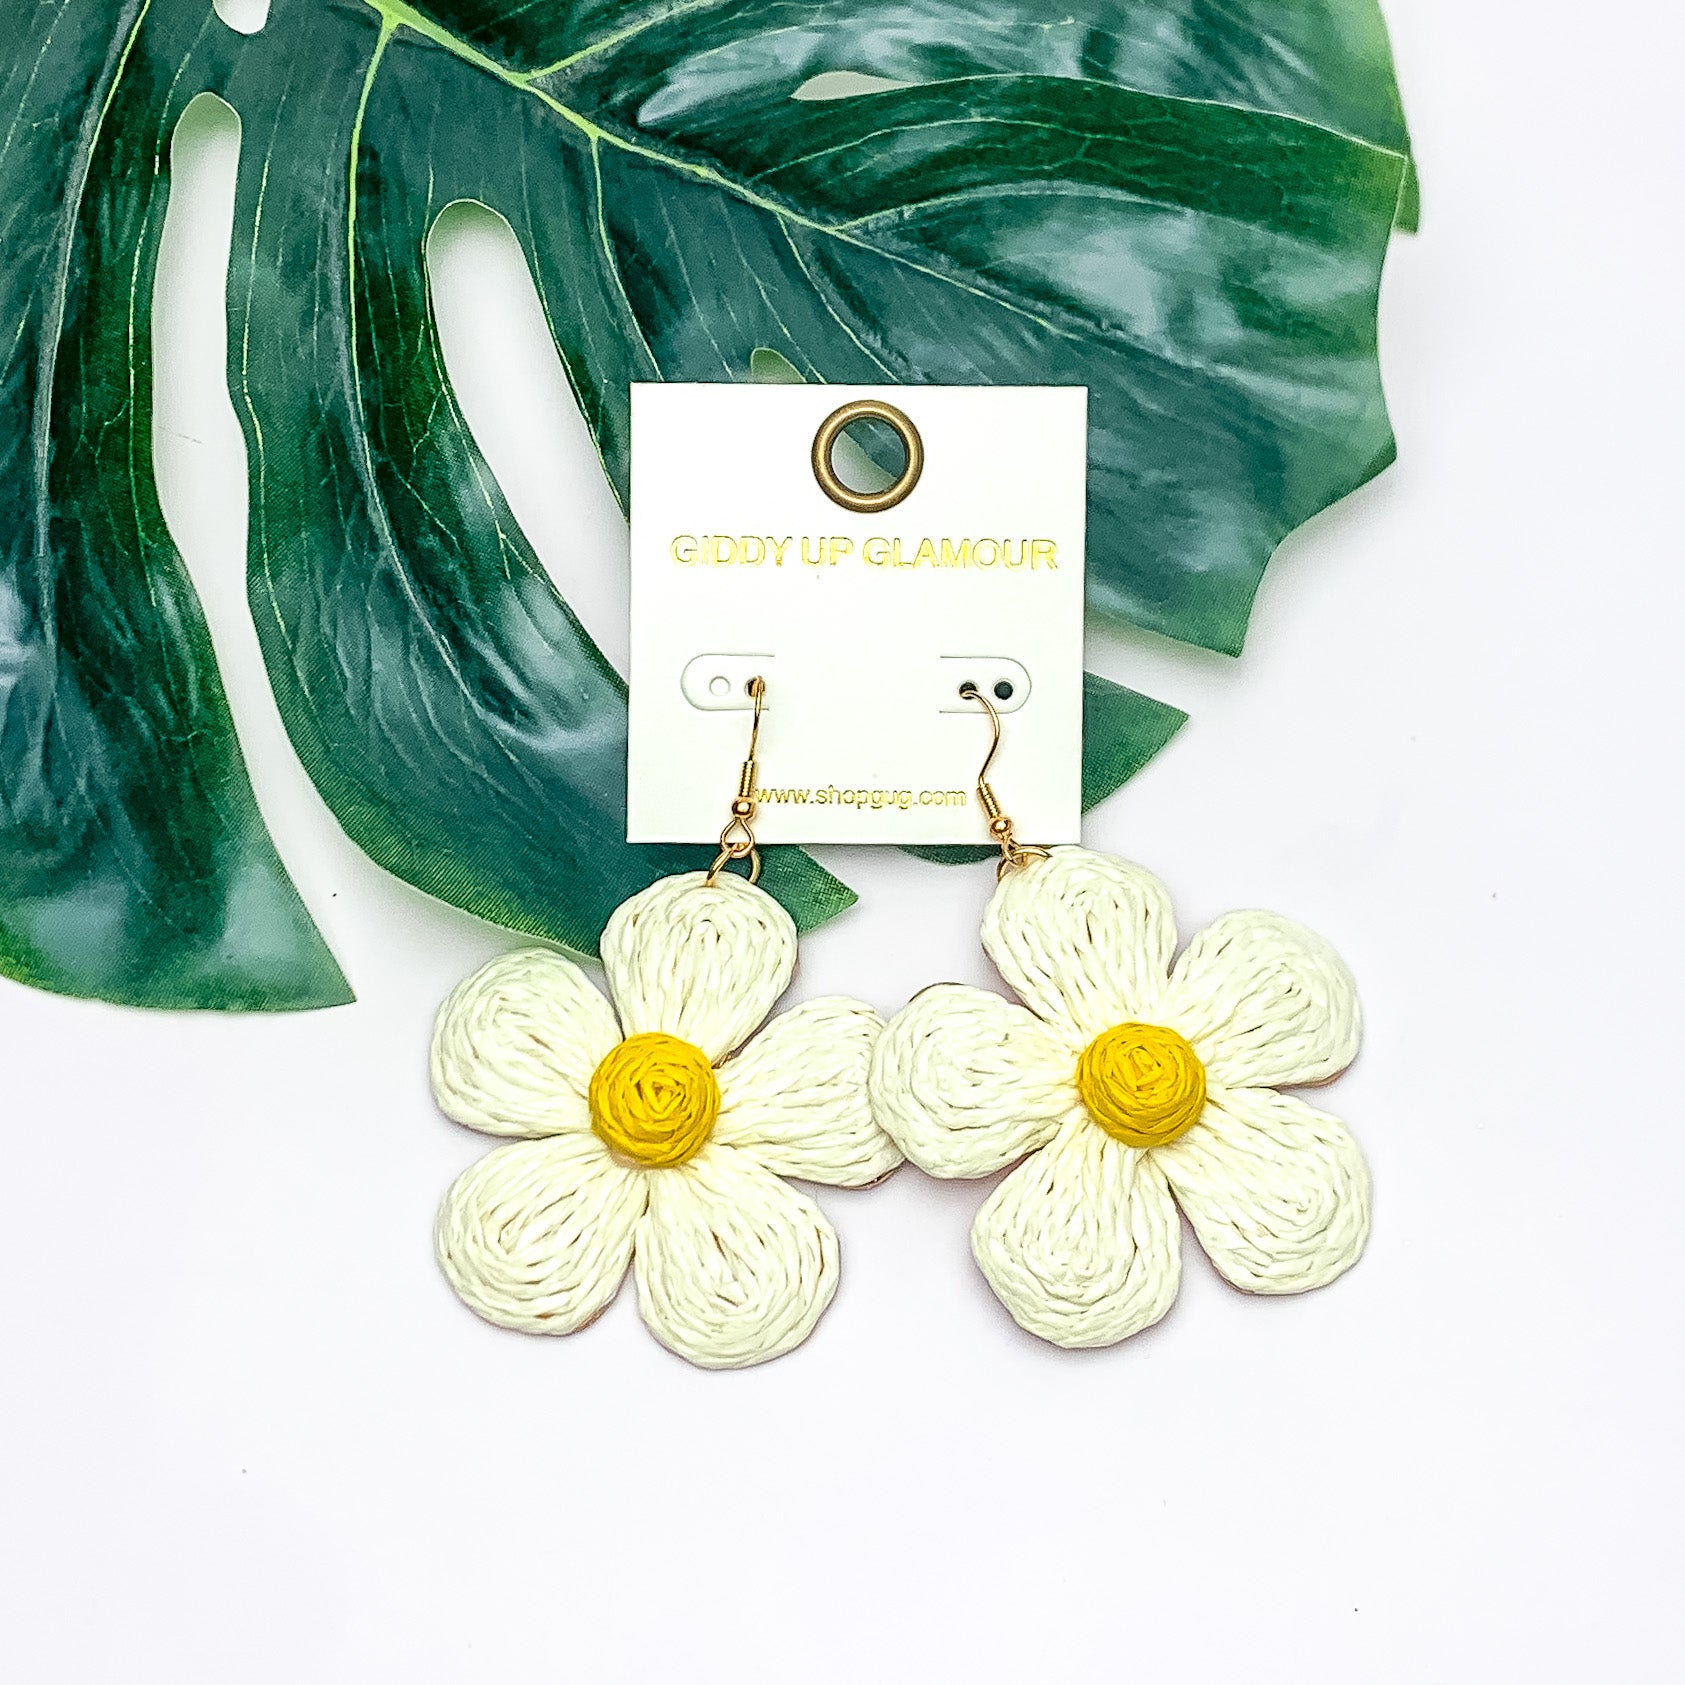 Darling Daisy Raffia Wrapped Flower Earrings in Ivory. Pictured on a white background with the earrings laying on a large leaf.